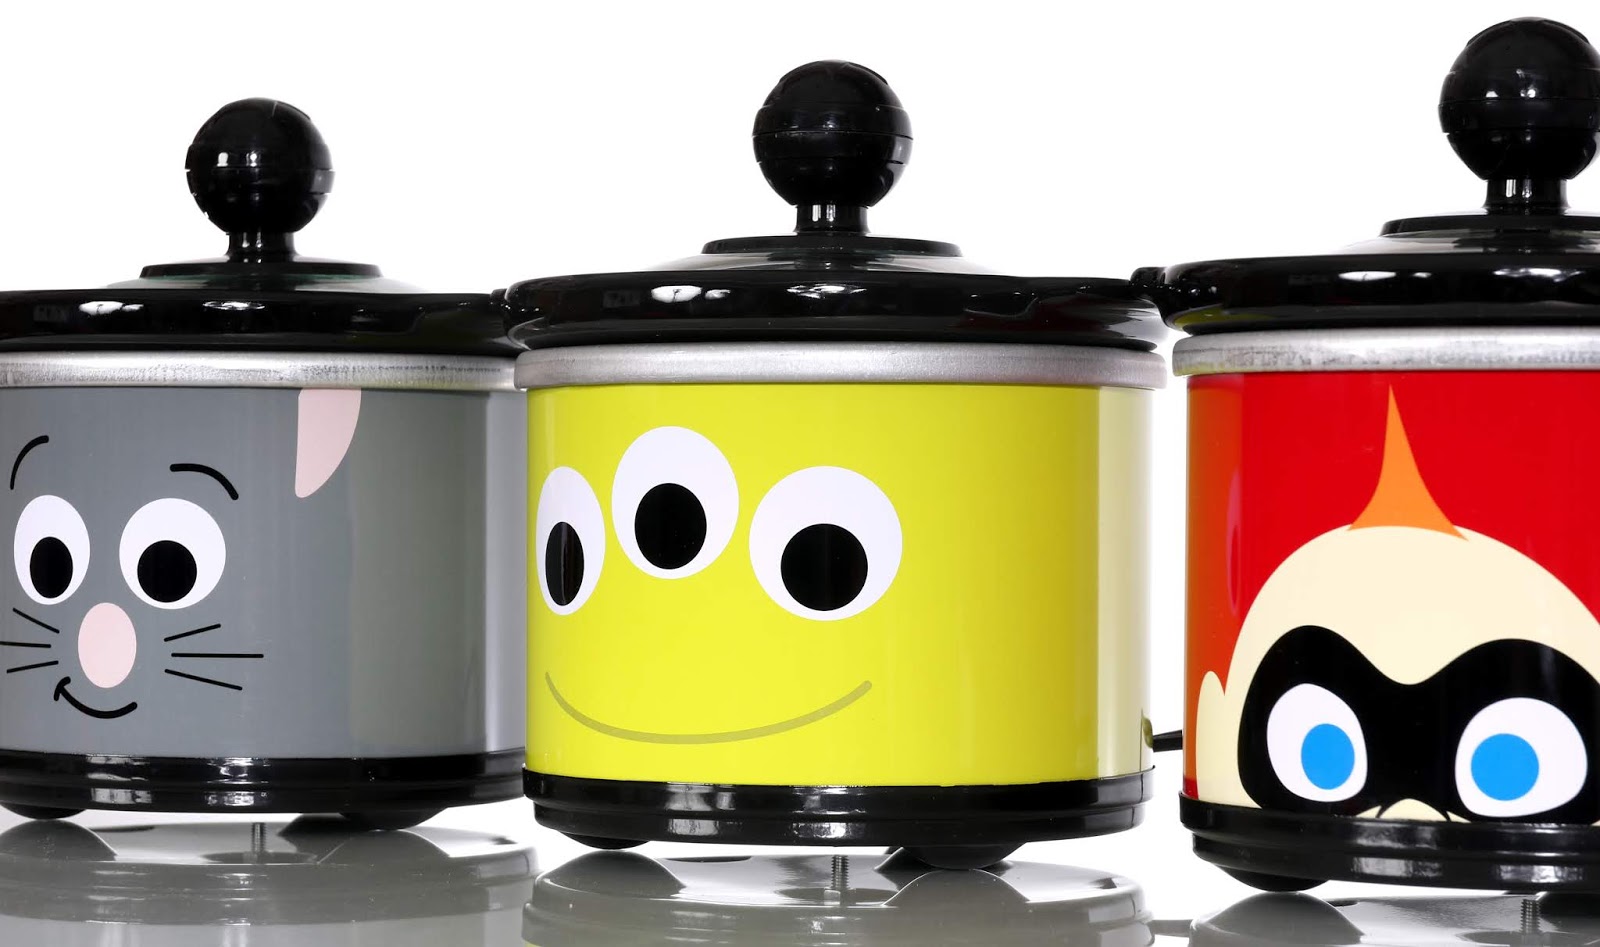 Pixar Collection 20 Ounce dippers Mini Crock Three Pack Review 